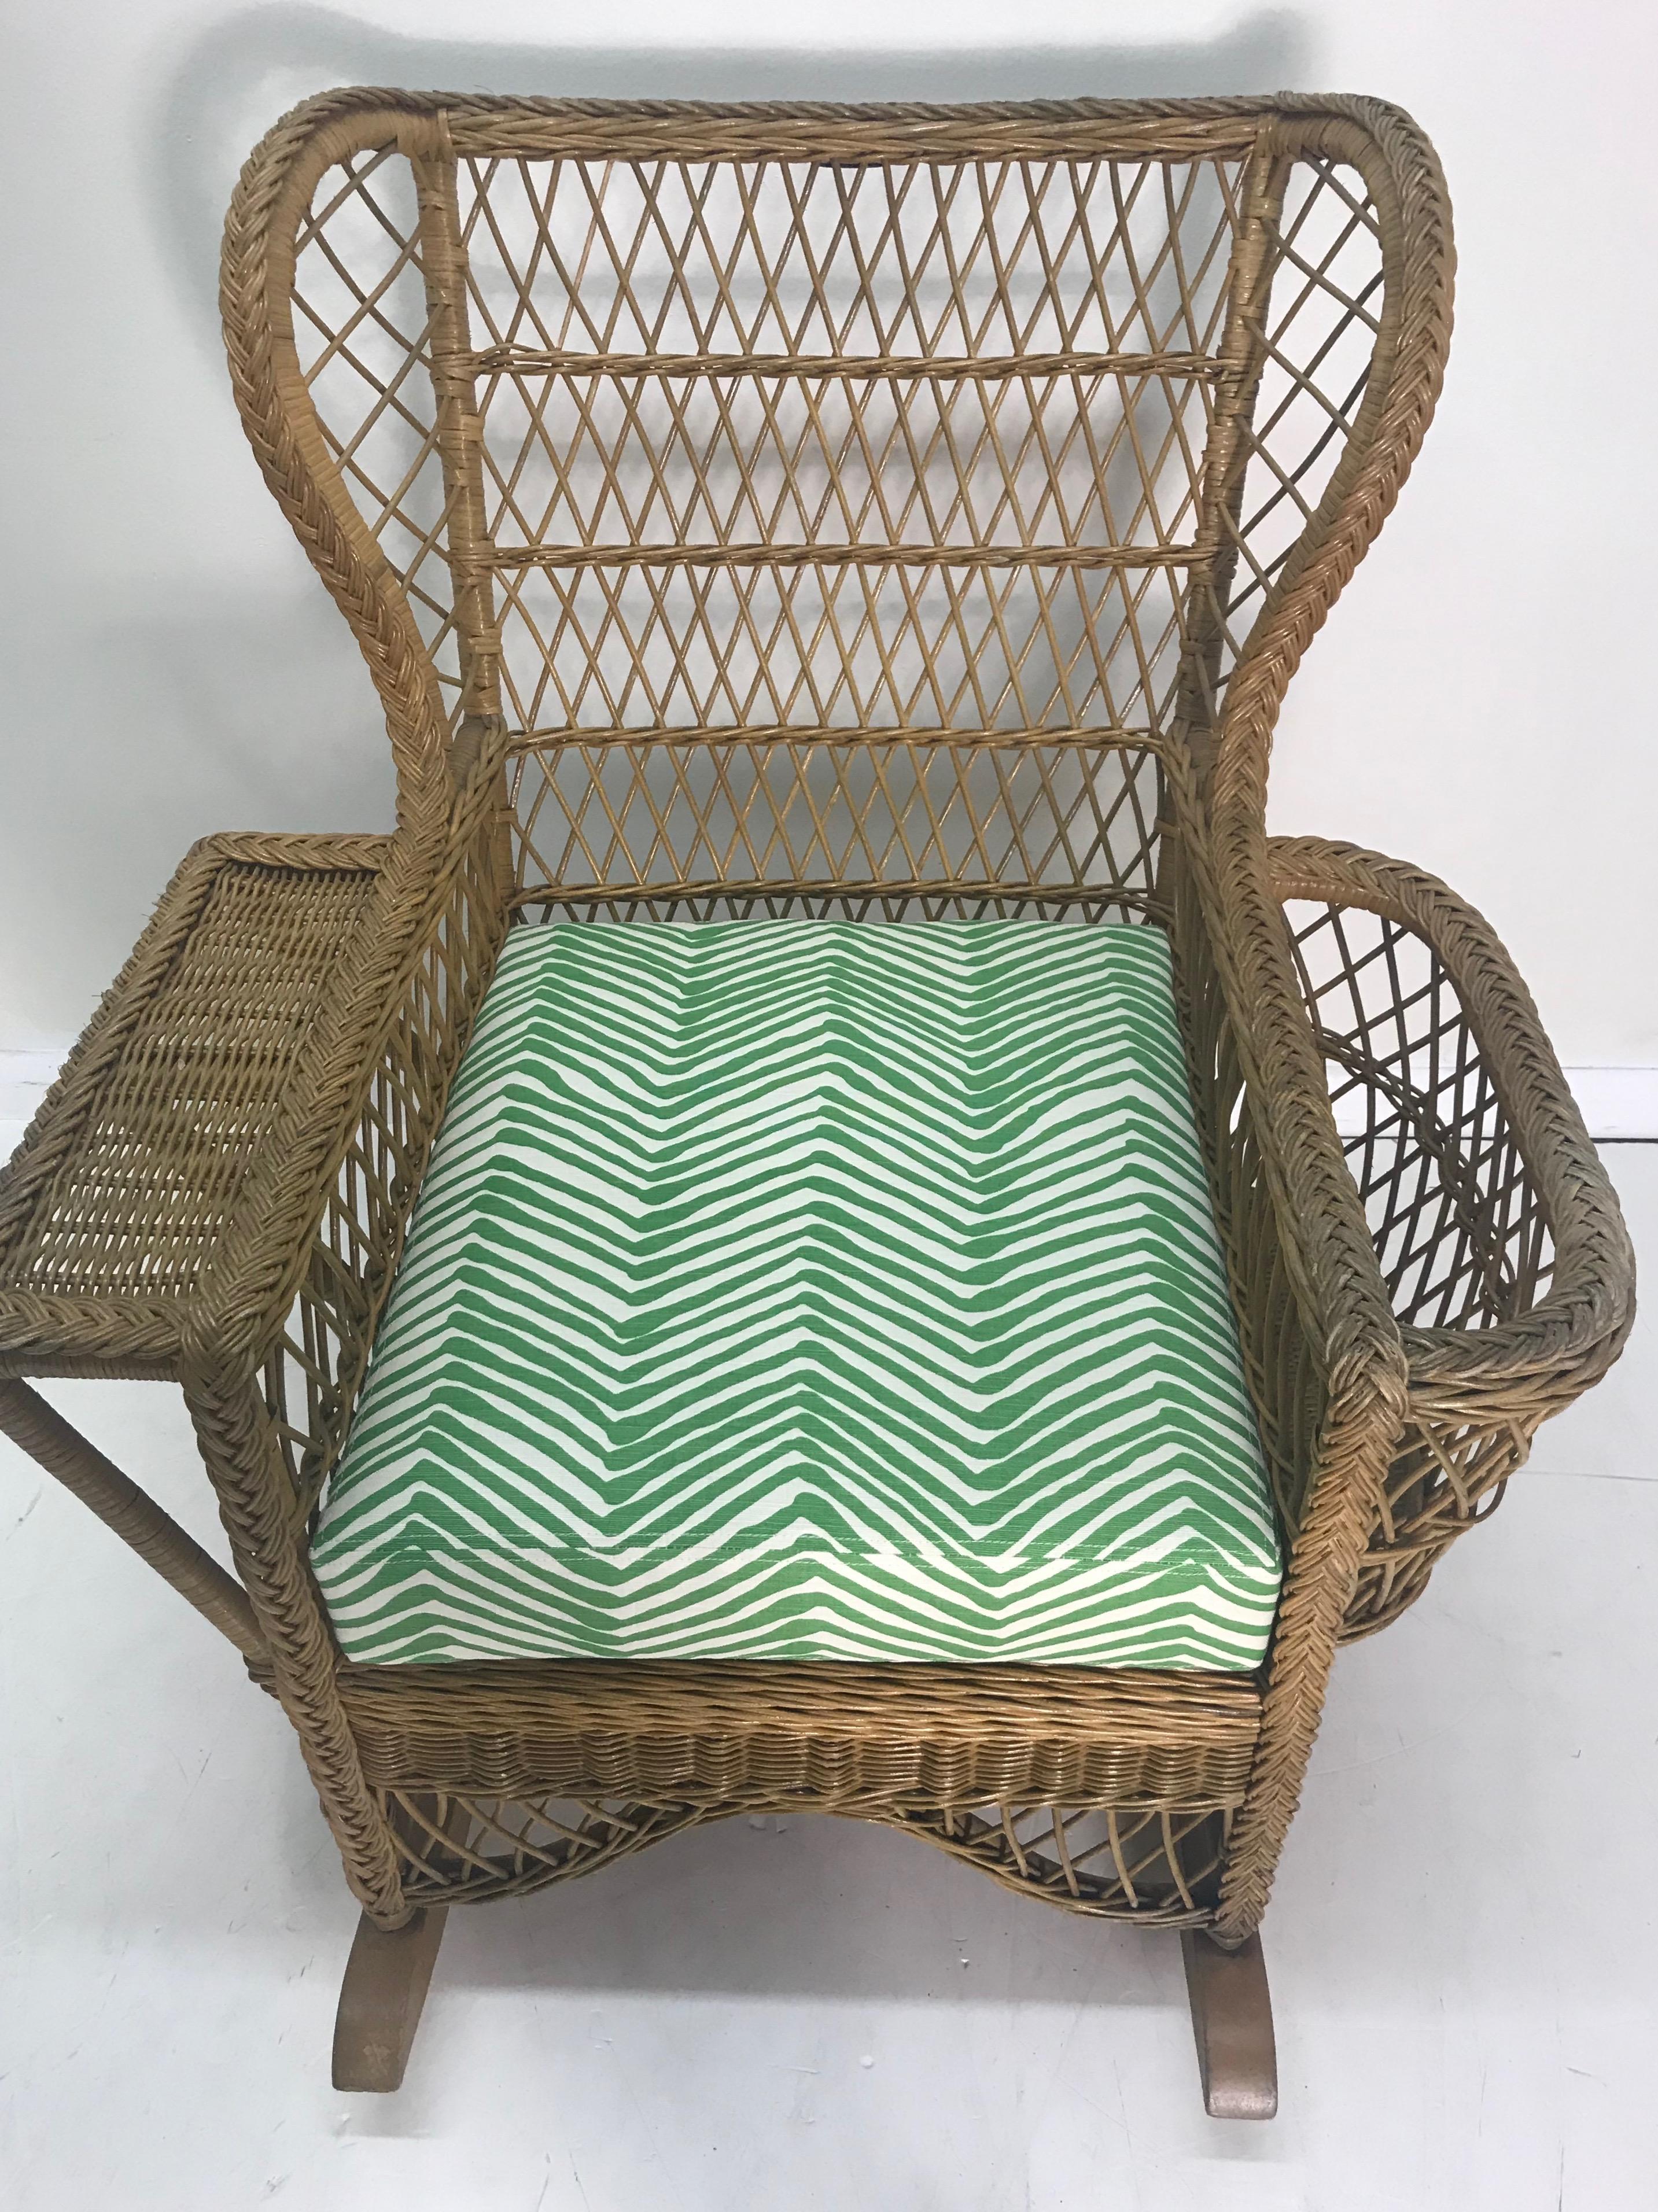 Henry link rattan rocker chair with new China sea cushion.